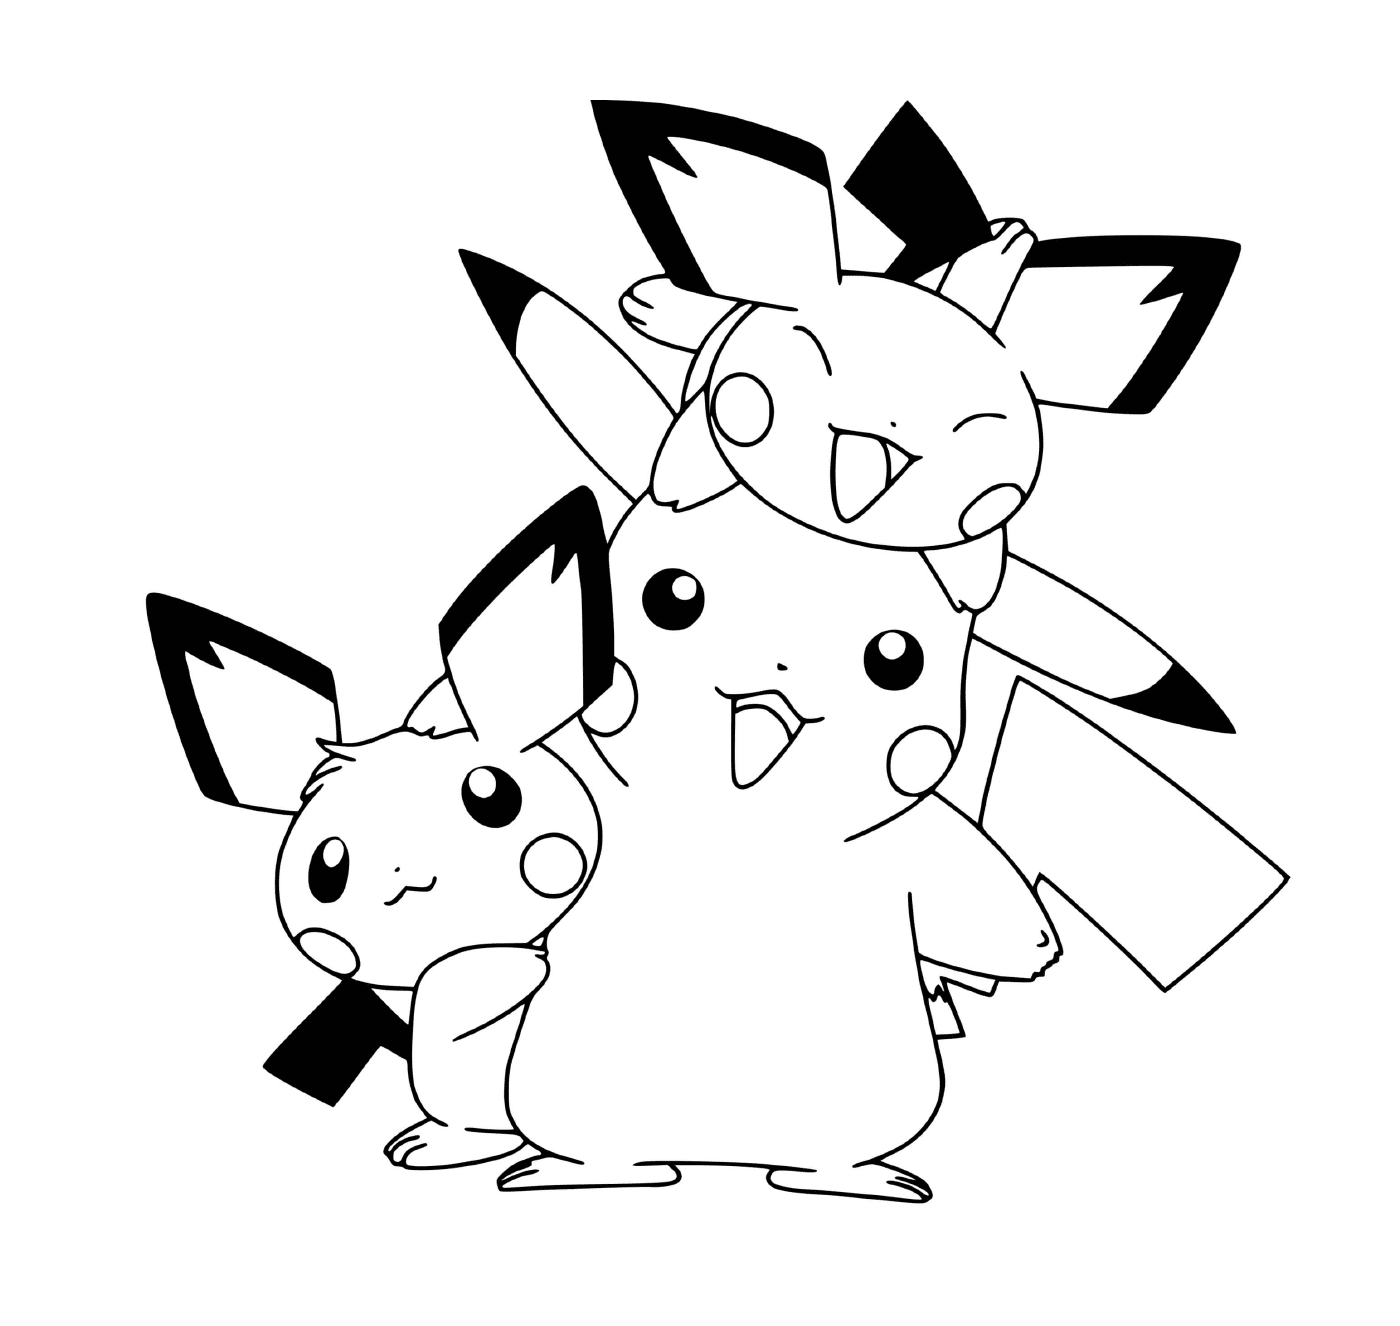  Pikachu cute with his cousins Pikachus to color 